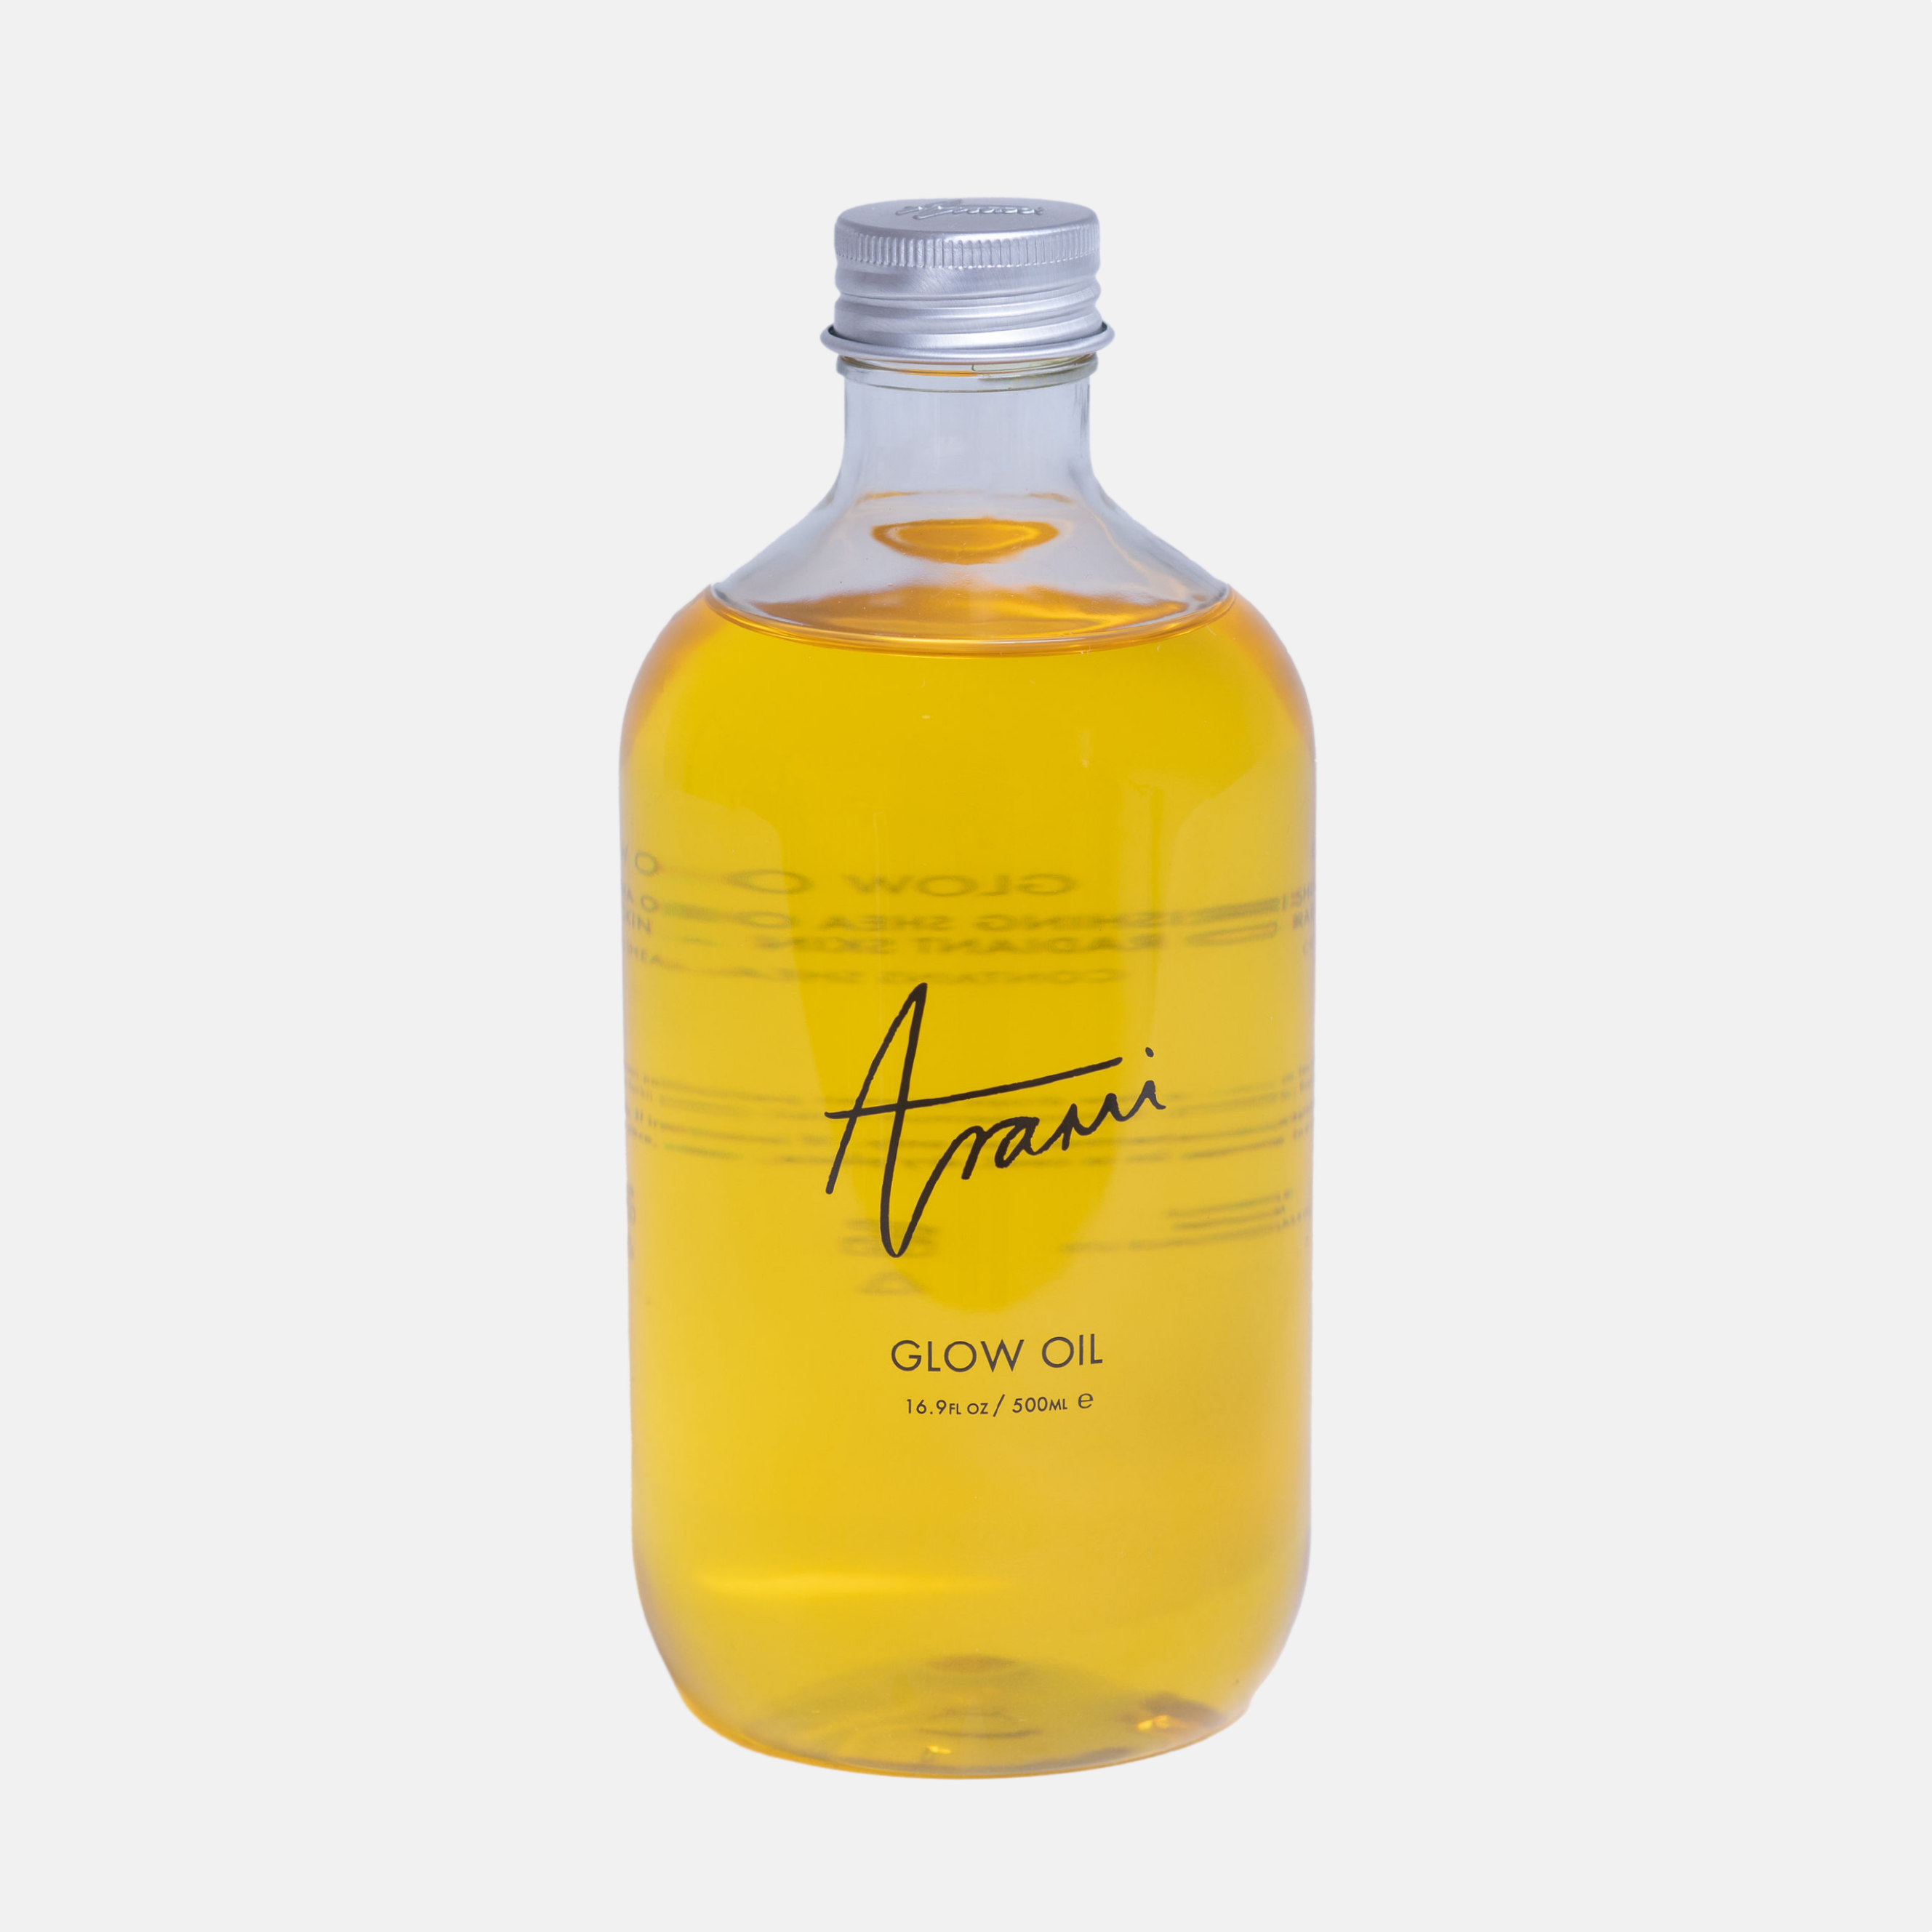 Glow oil 500ml. Arami's product bestseller for your skin.